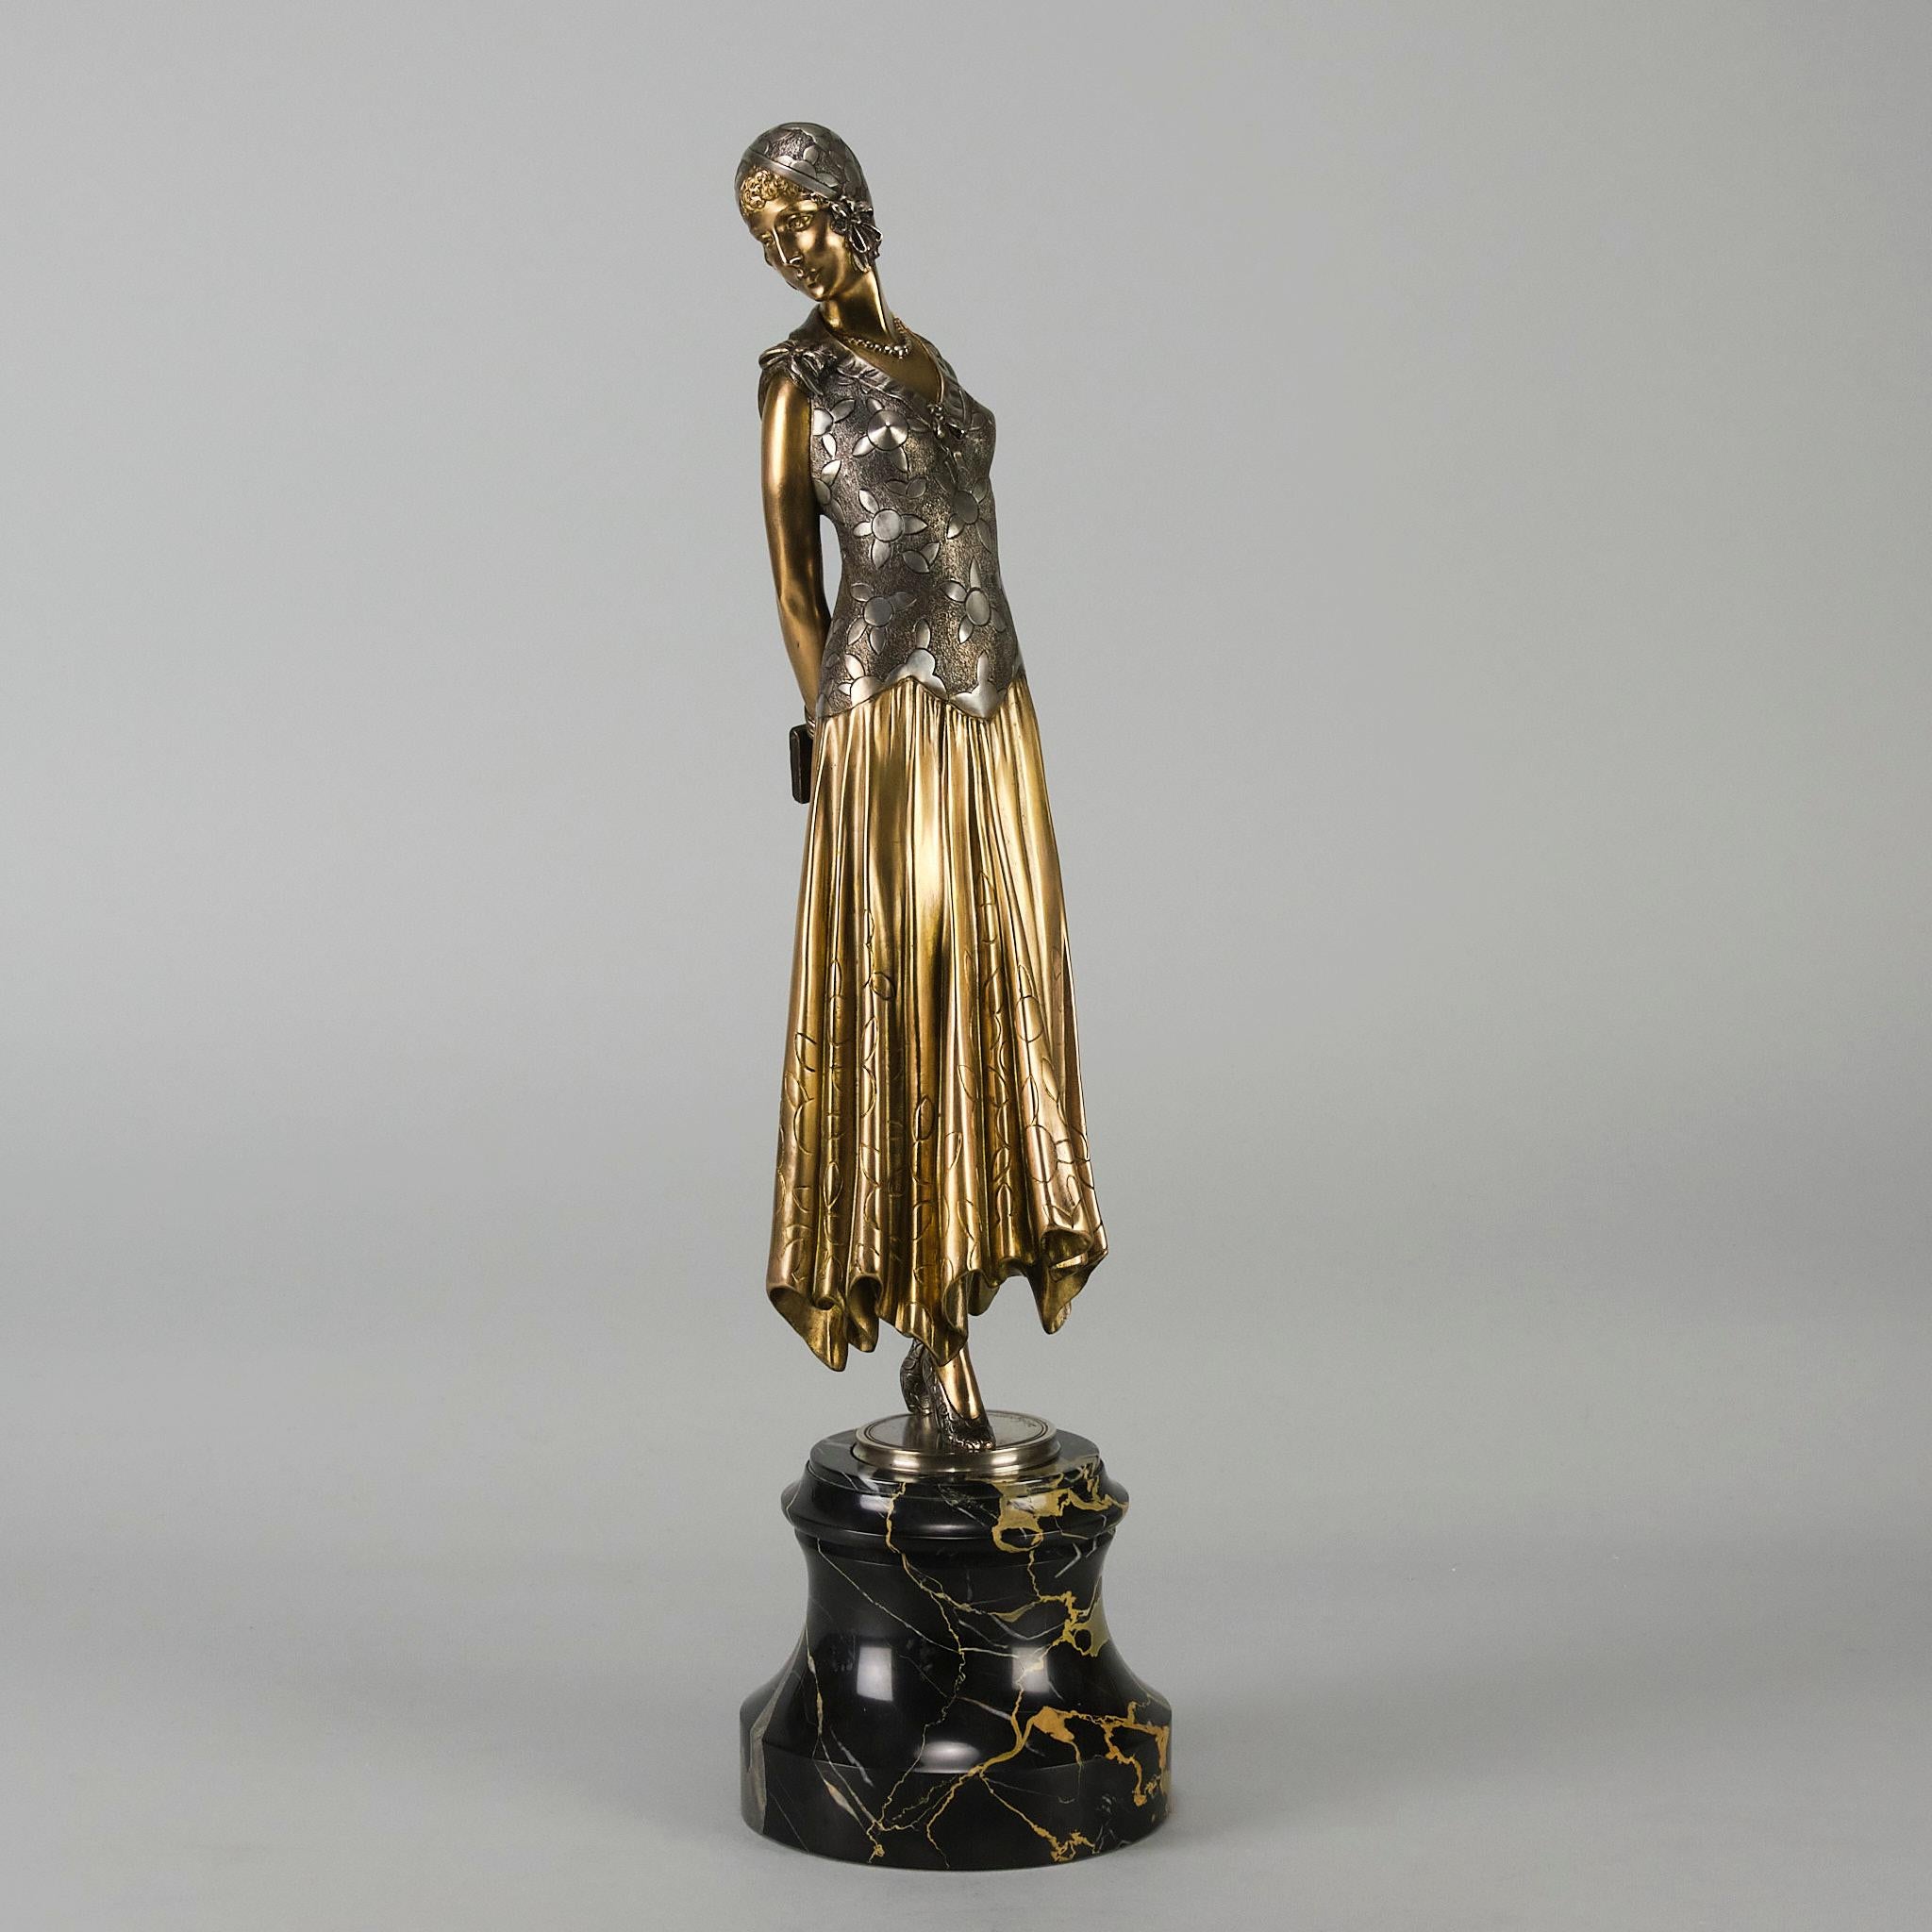 Carved Early 20th Century Art Deco Bronze Sculpture entitled 